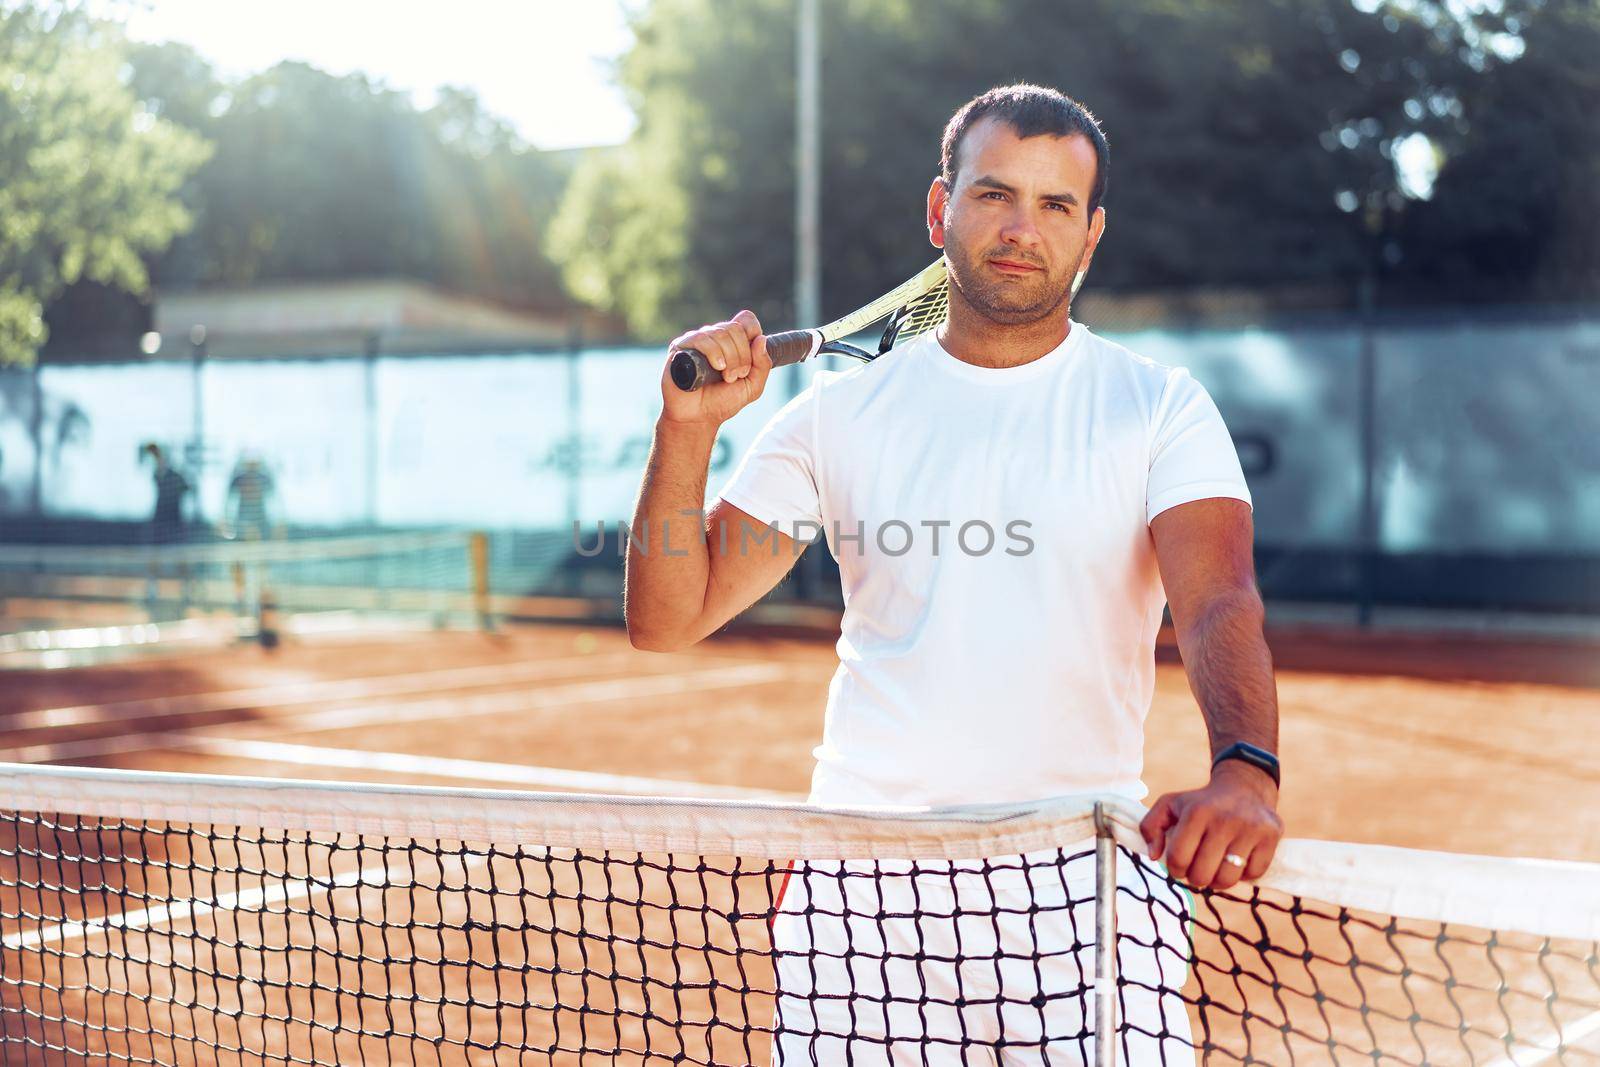 Spoty man with tennis racket standing on clay tennis court near net